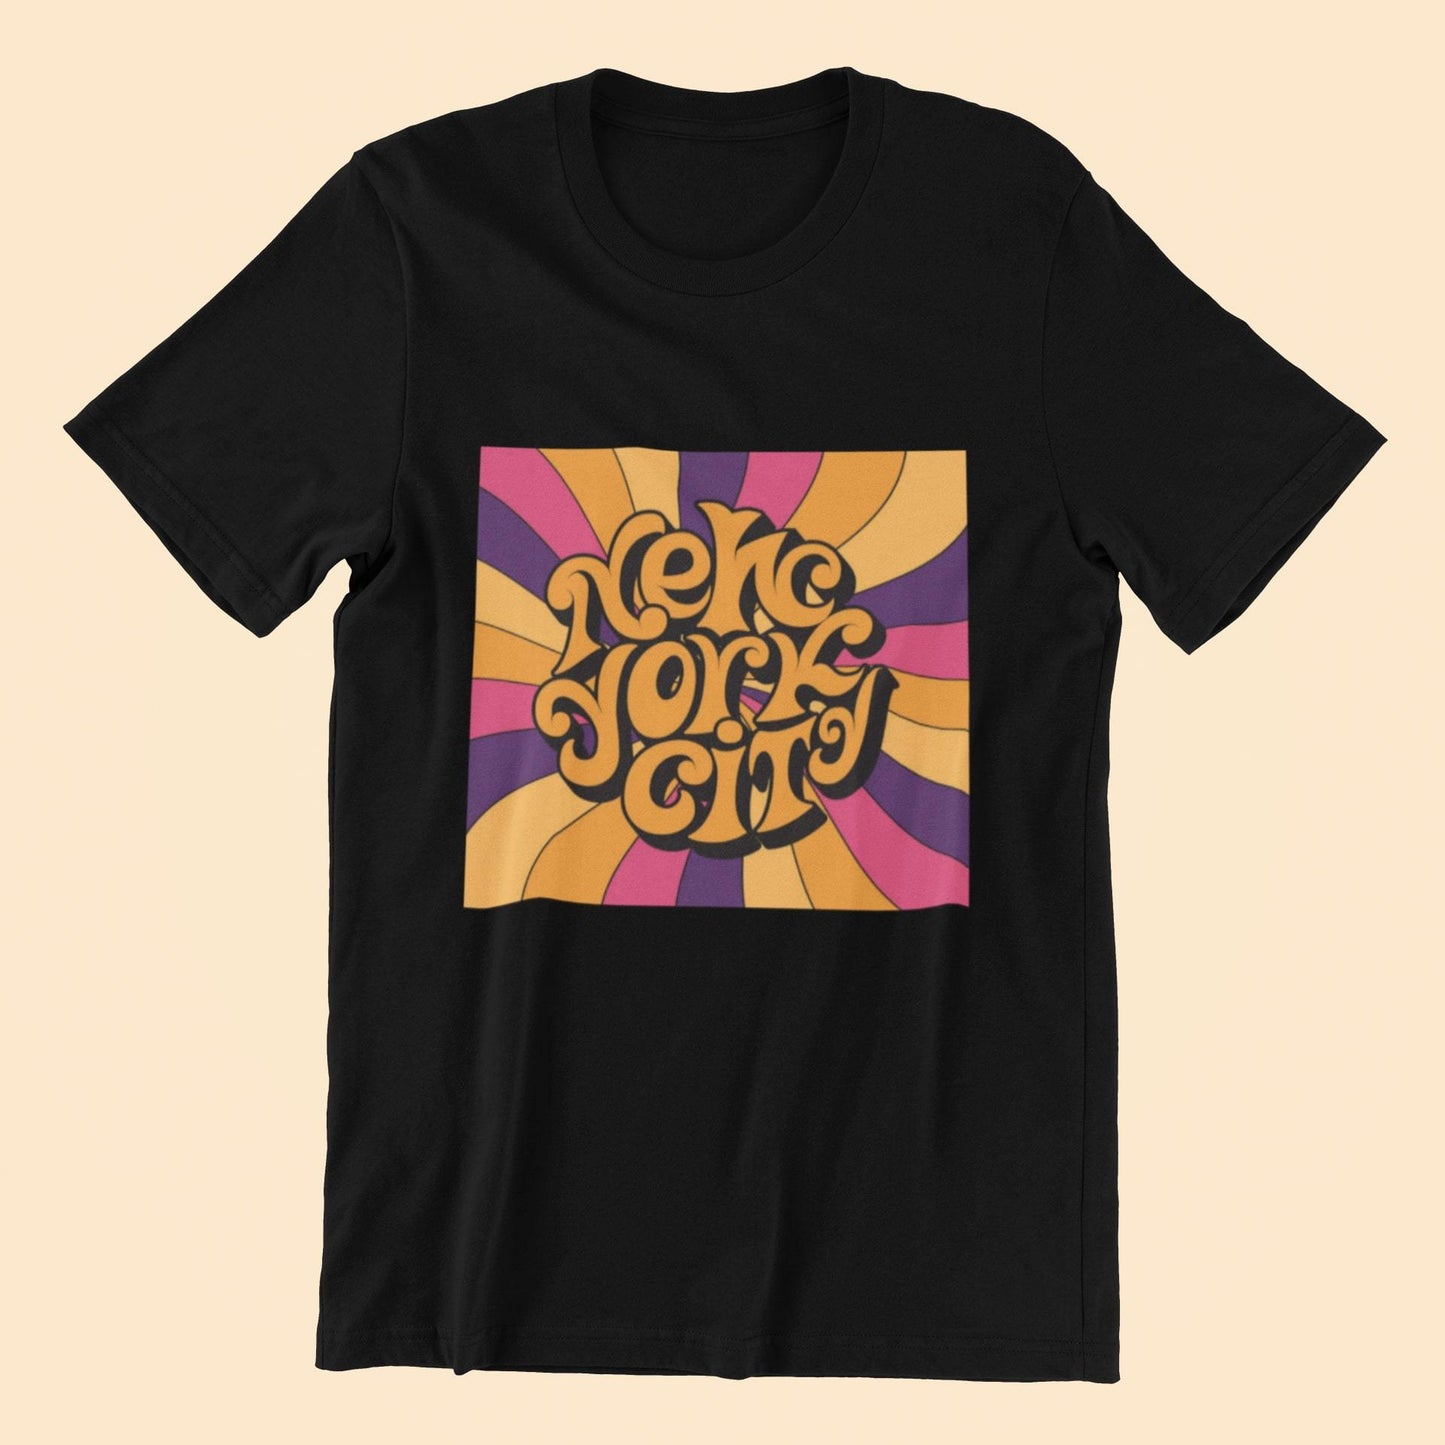 Psychedelic New York City Inspired T shirt for Men - Insane Tees